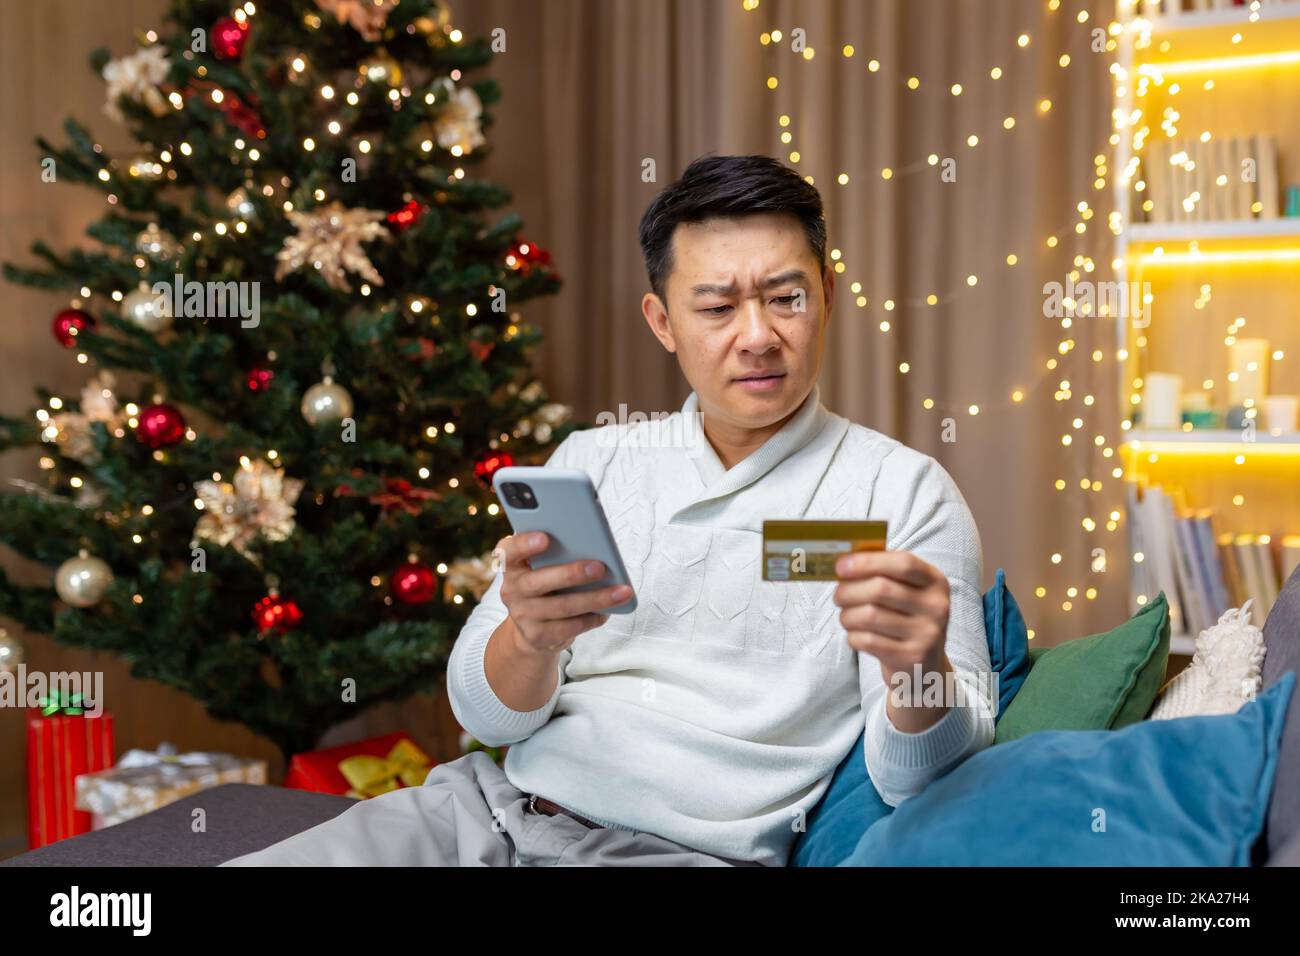 Worried and serious young Asian man sitting on sofa near Christmas tree at home. Holds phone and credit card in hands, can't pay for holiday online purchases, can't place an order. Stock Photo